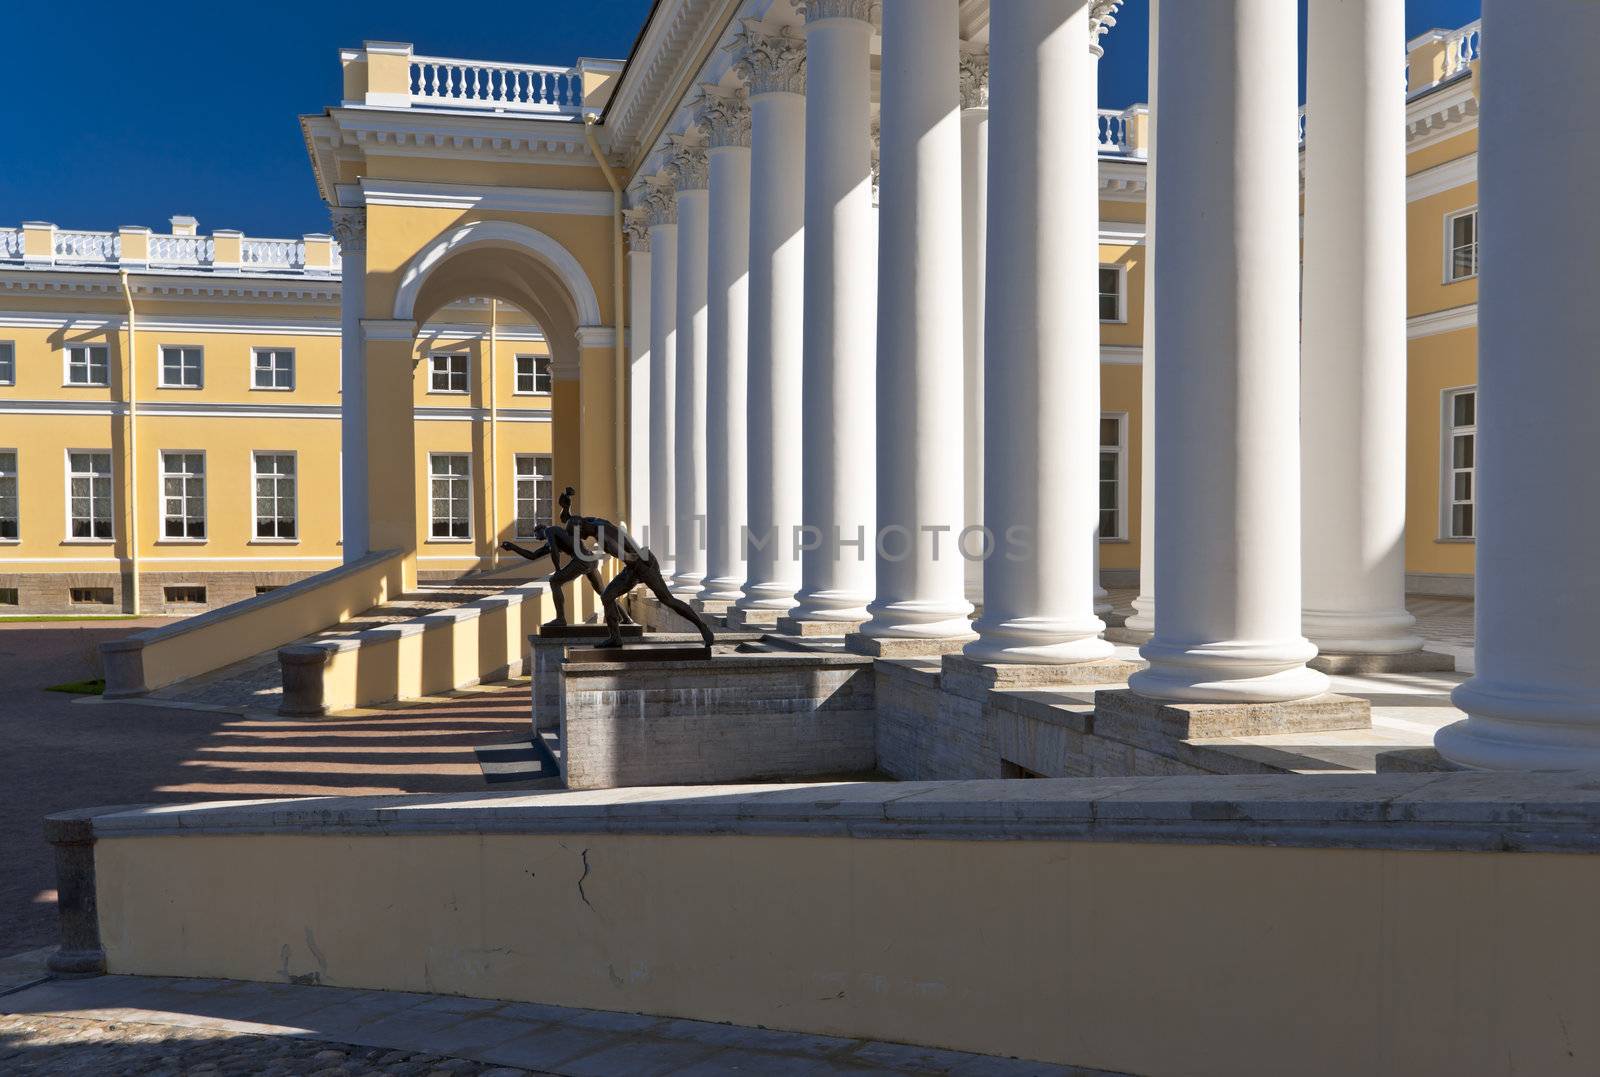 Classical building of Aleksandrovsky palace with white columns